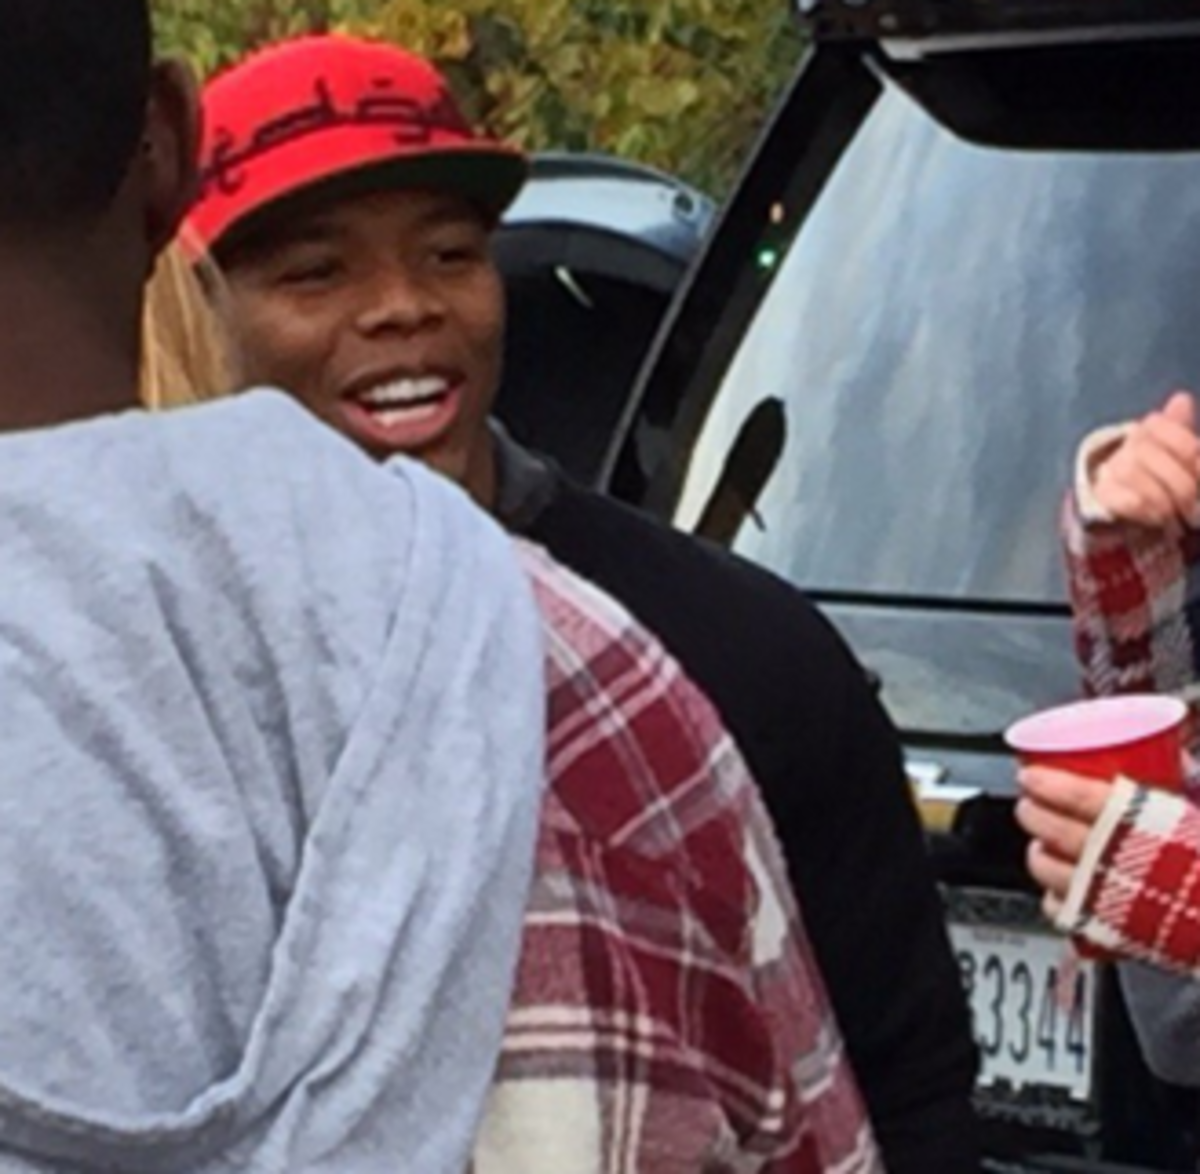 Ray Rice on Rutgers' campus before their game against Ohio State.